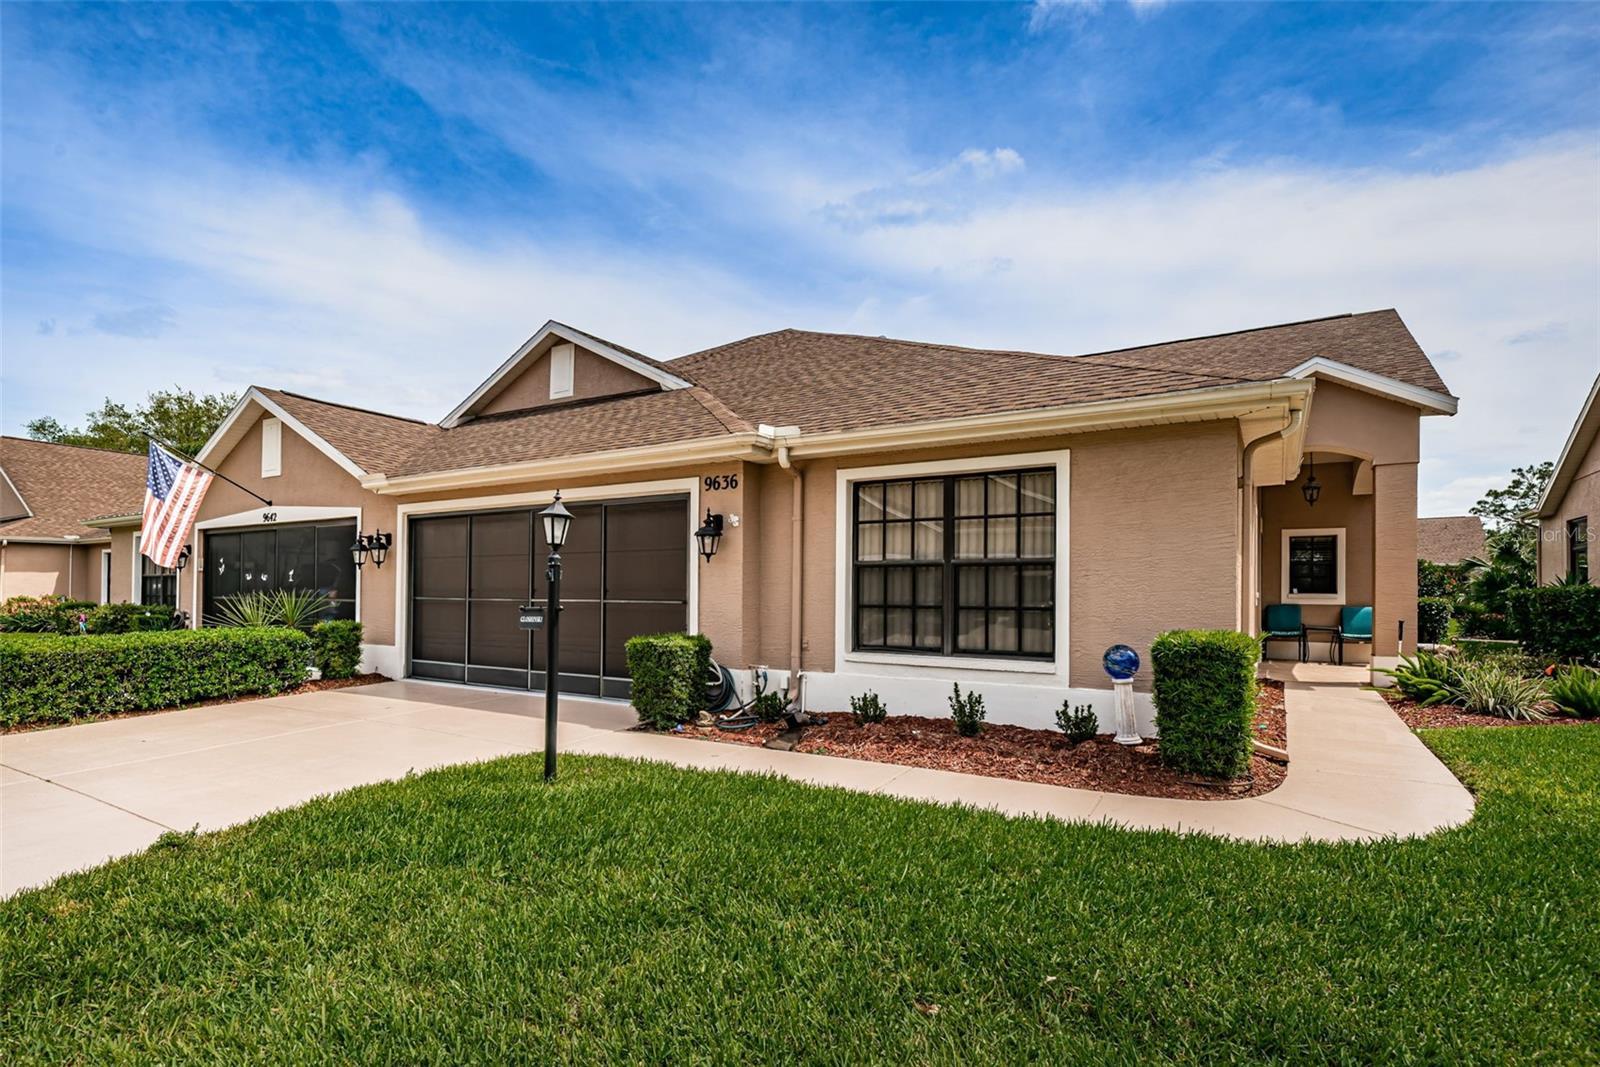 Photo one of 9636 Brookdale Dr New Port Richey FL 34655 | MLS W7863769